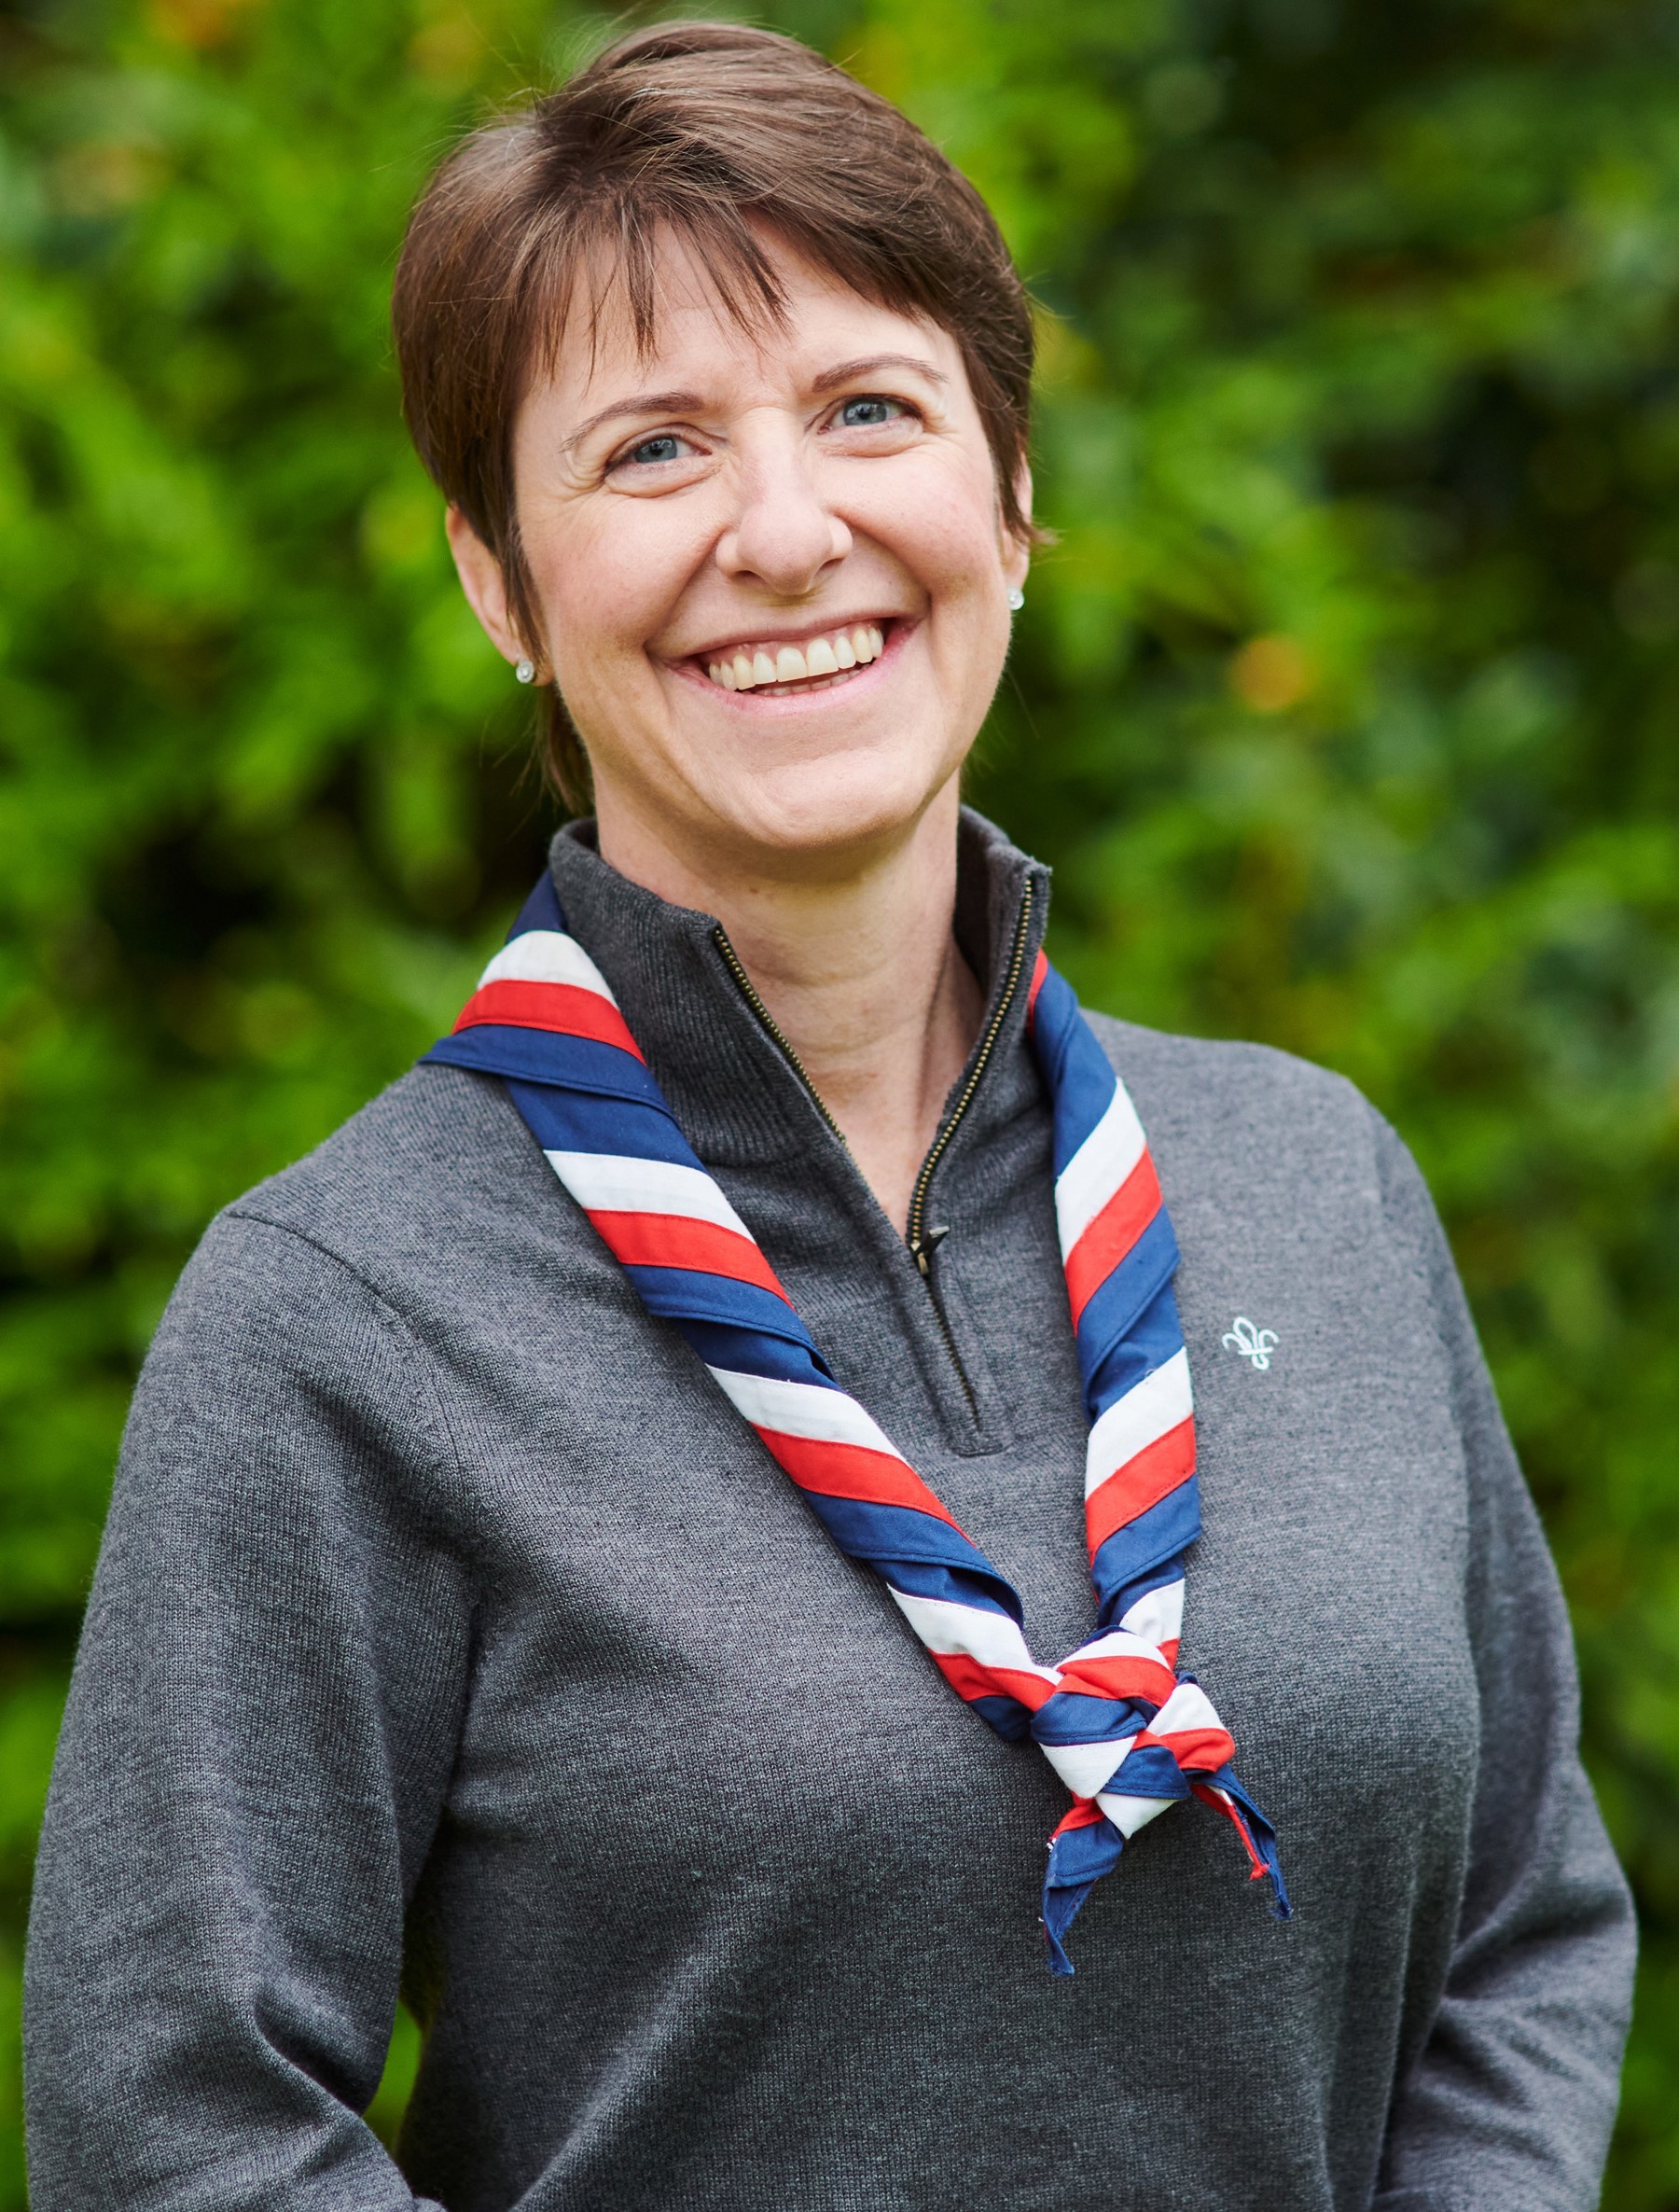 Caroline Pearce smiling at the camera while wearing a grey Scouts jumper and stripy scarf